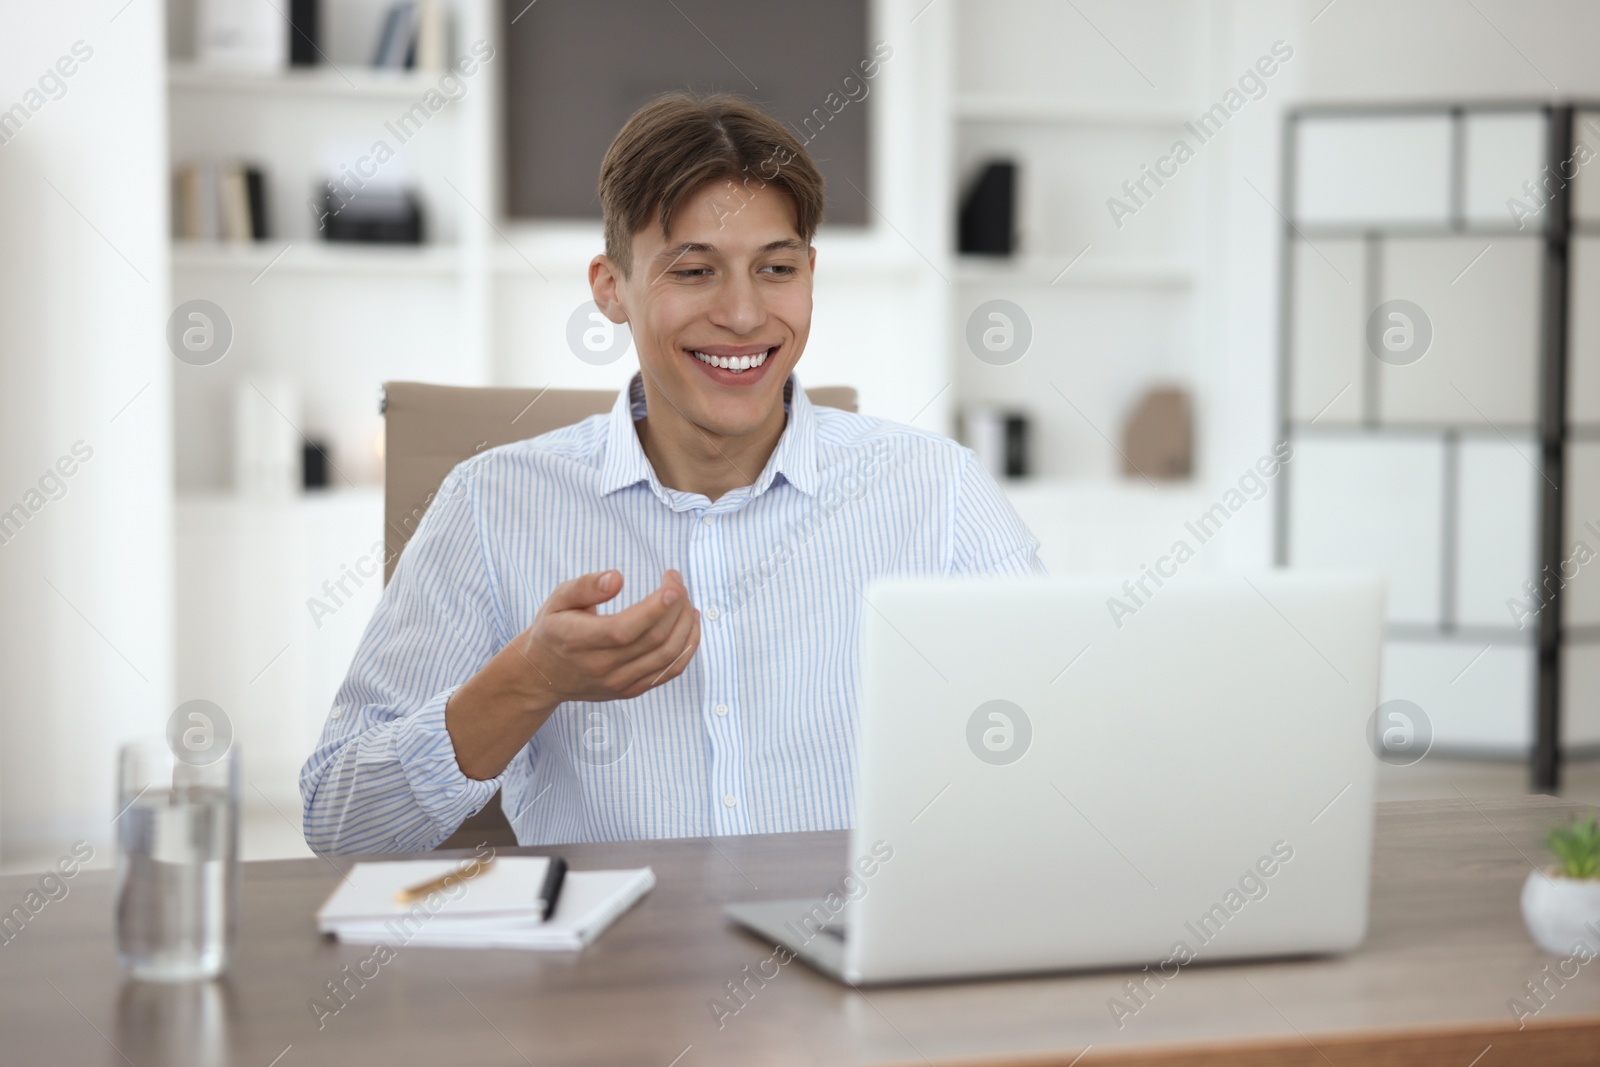 Photo of Man using video chat during webinar at wooden table in office